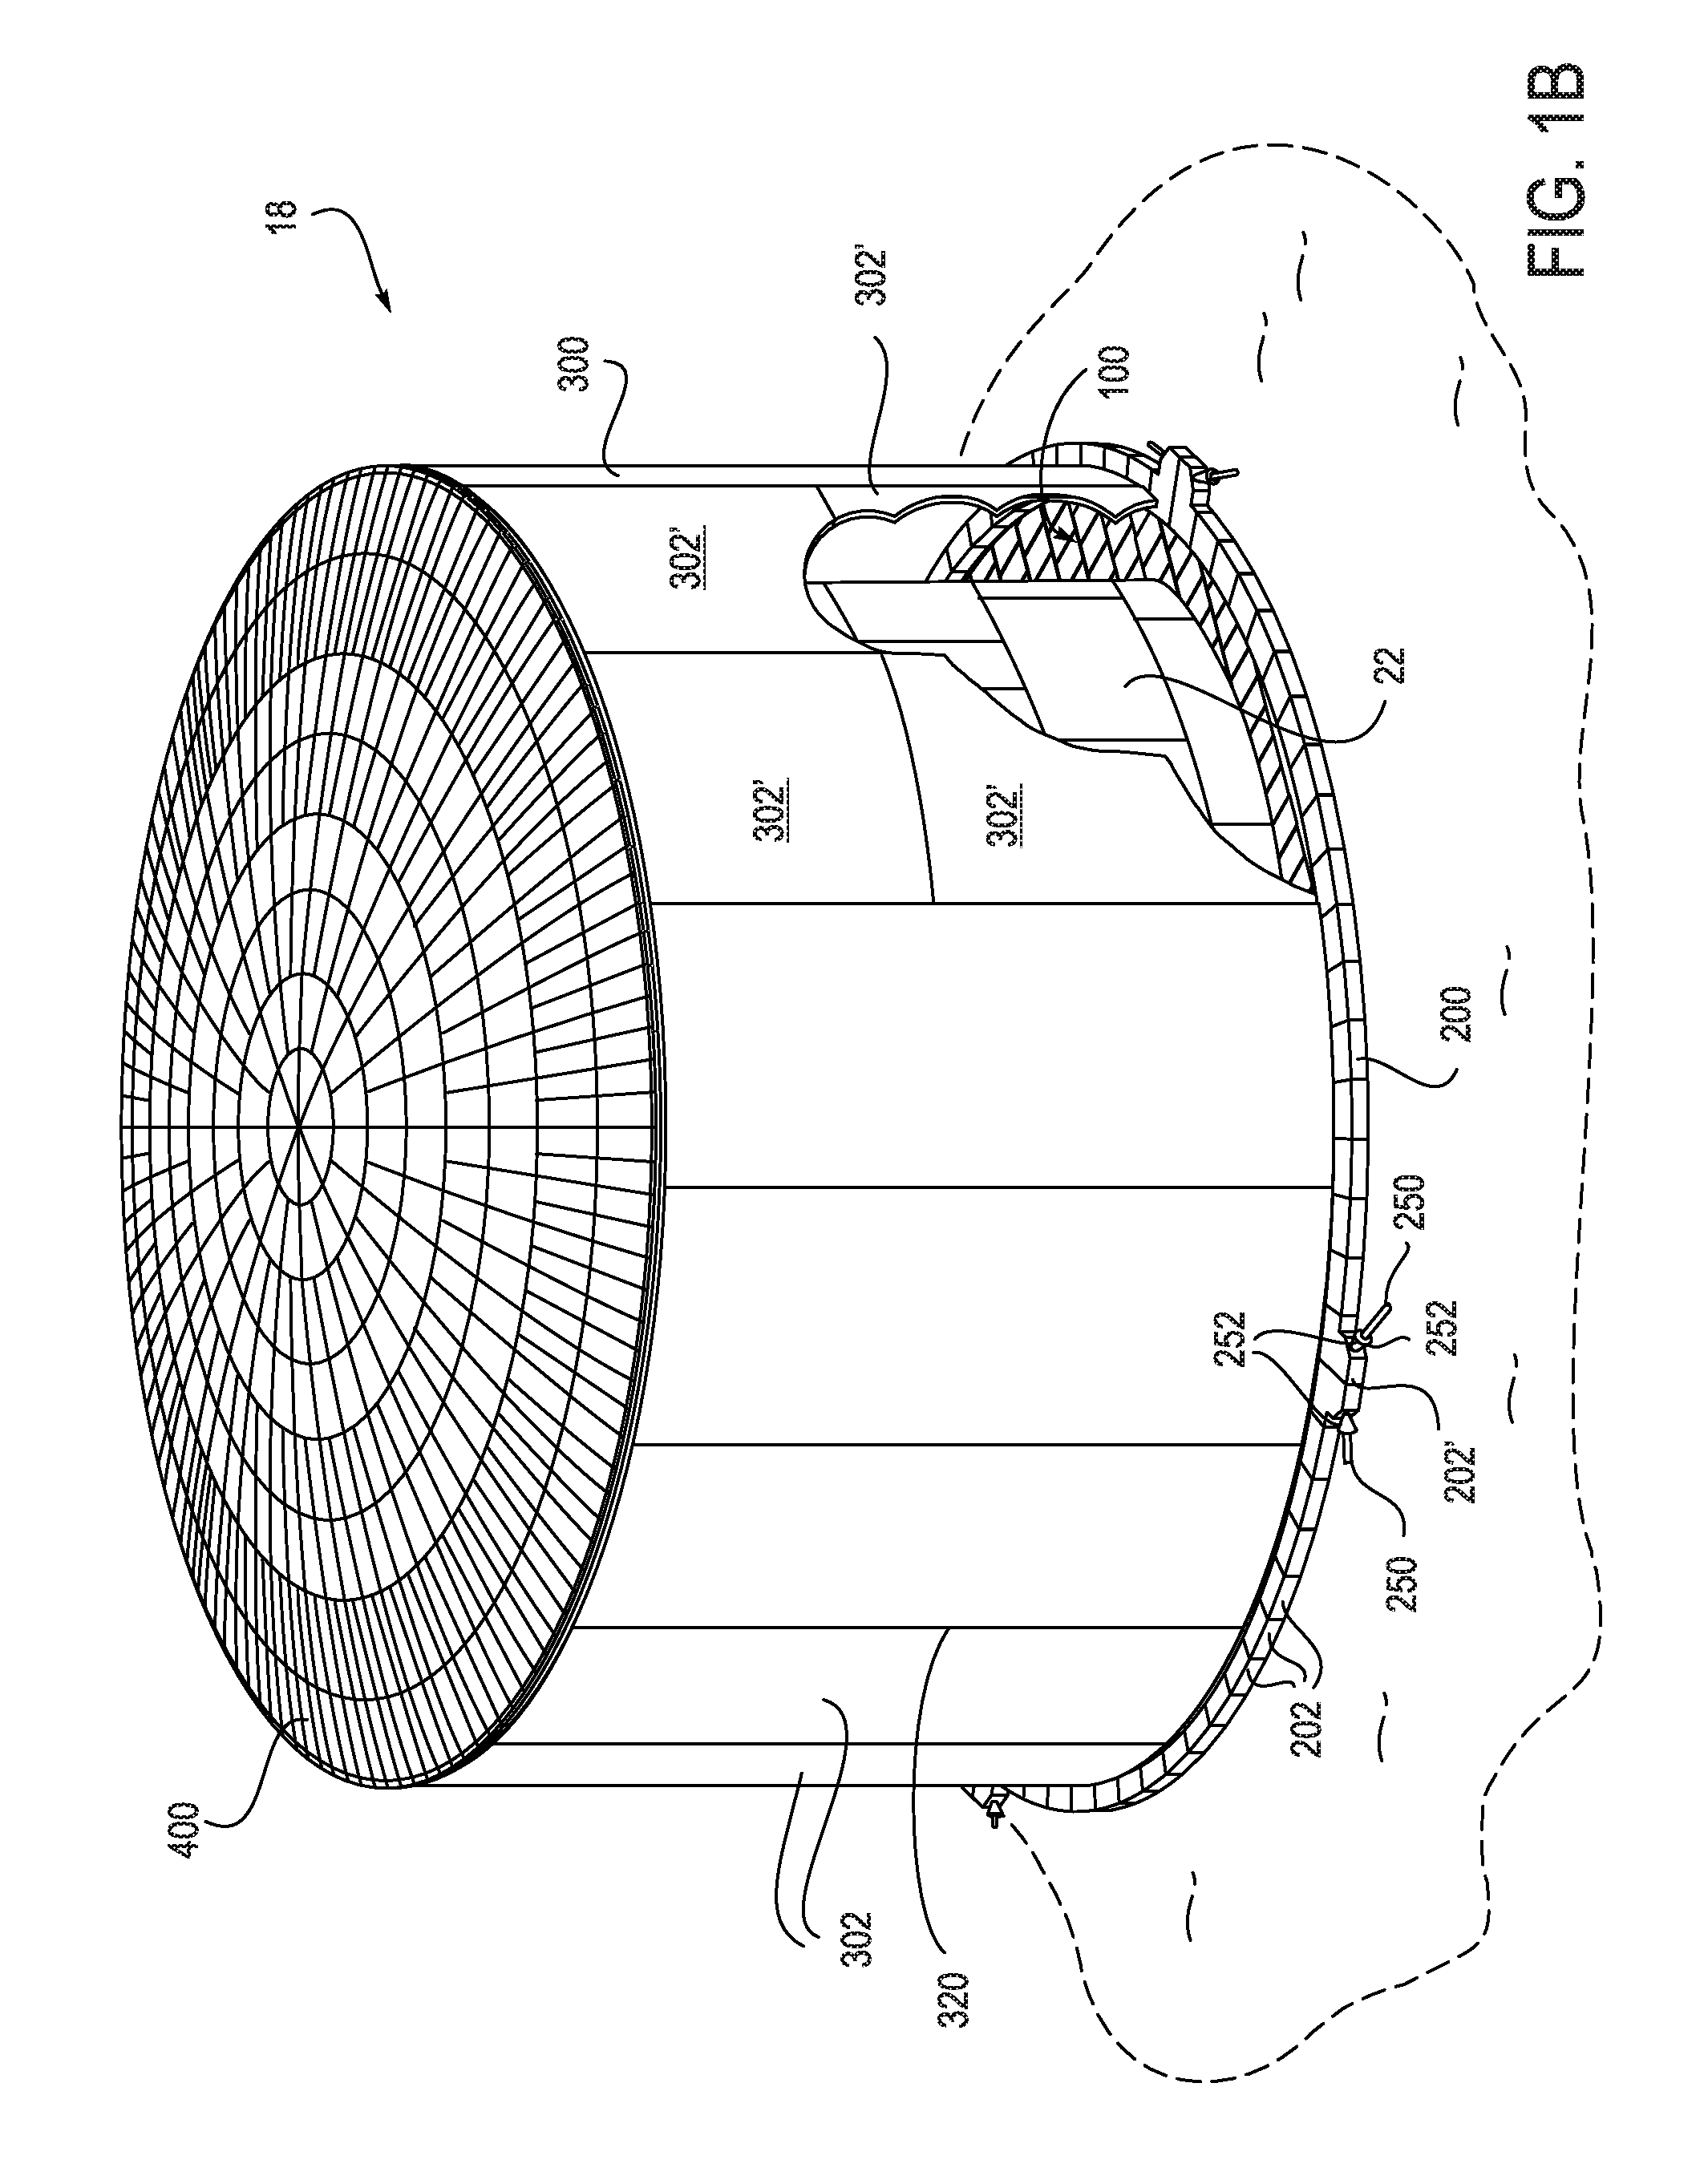 Base Mat Assembly And Method For Constructing The Same